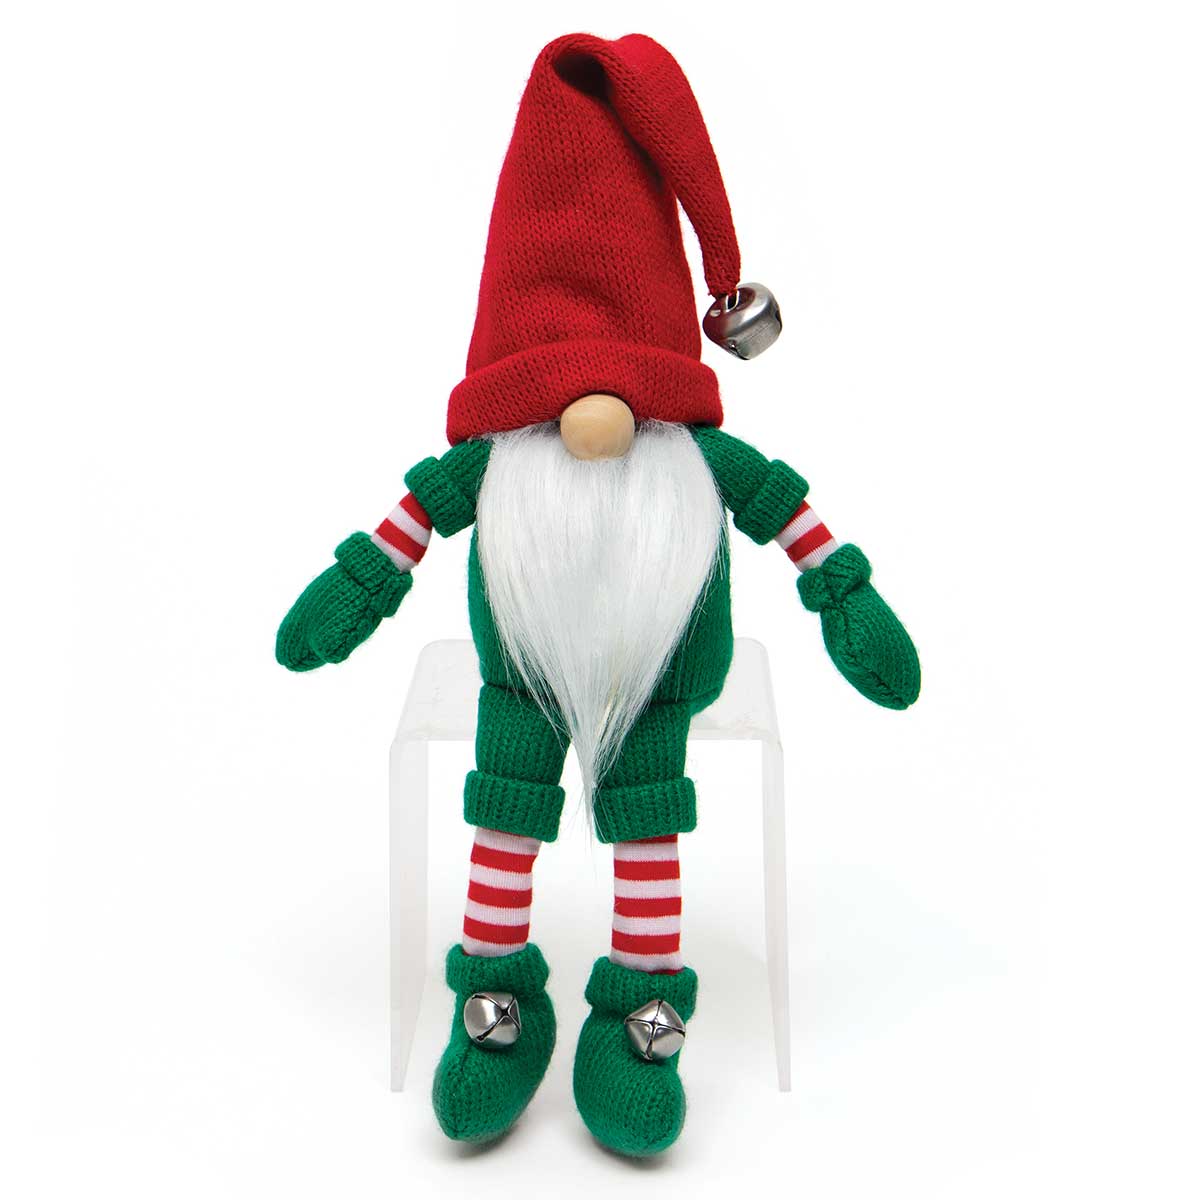 !ELF GNOME RED/GREEN WITH JINGLE BELLS, WOOD NOSE